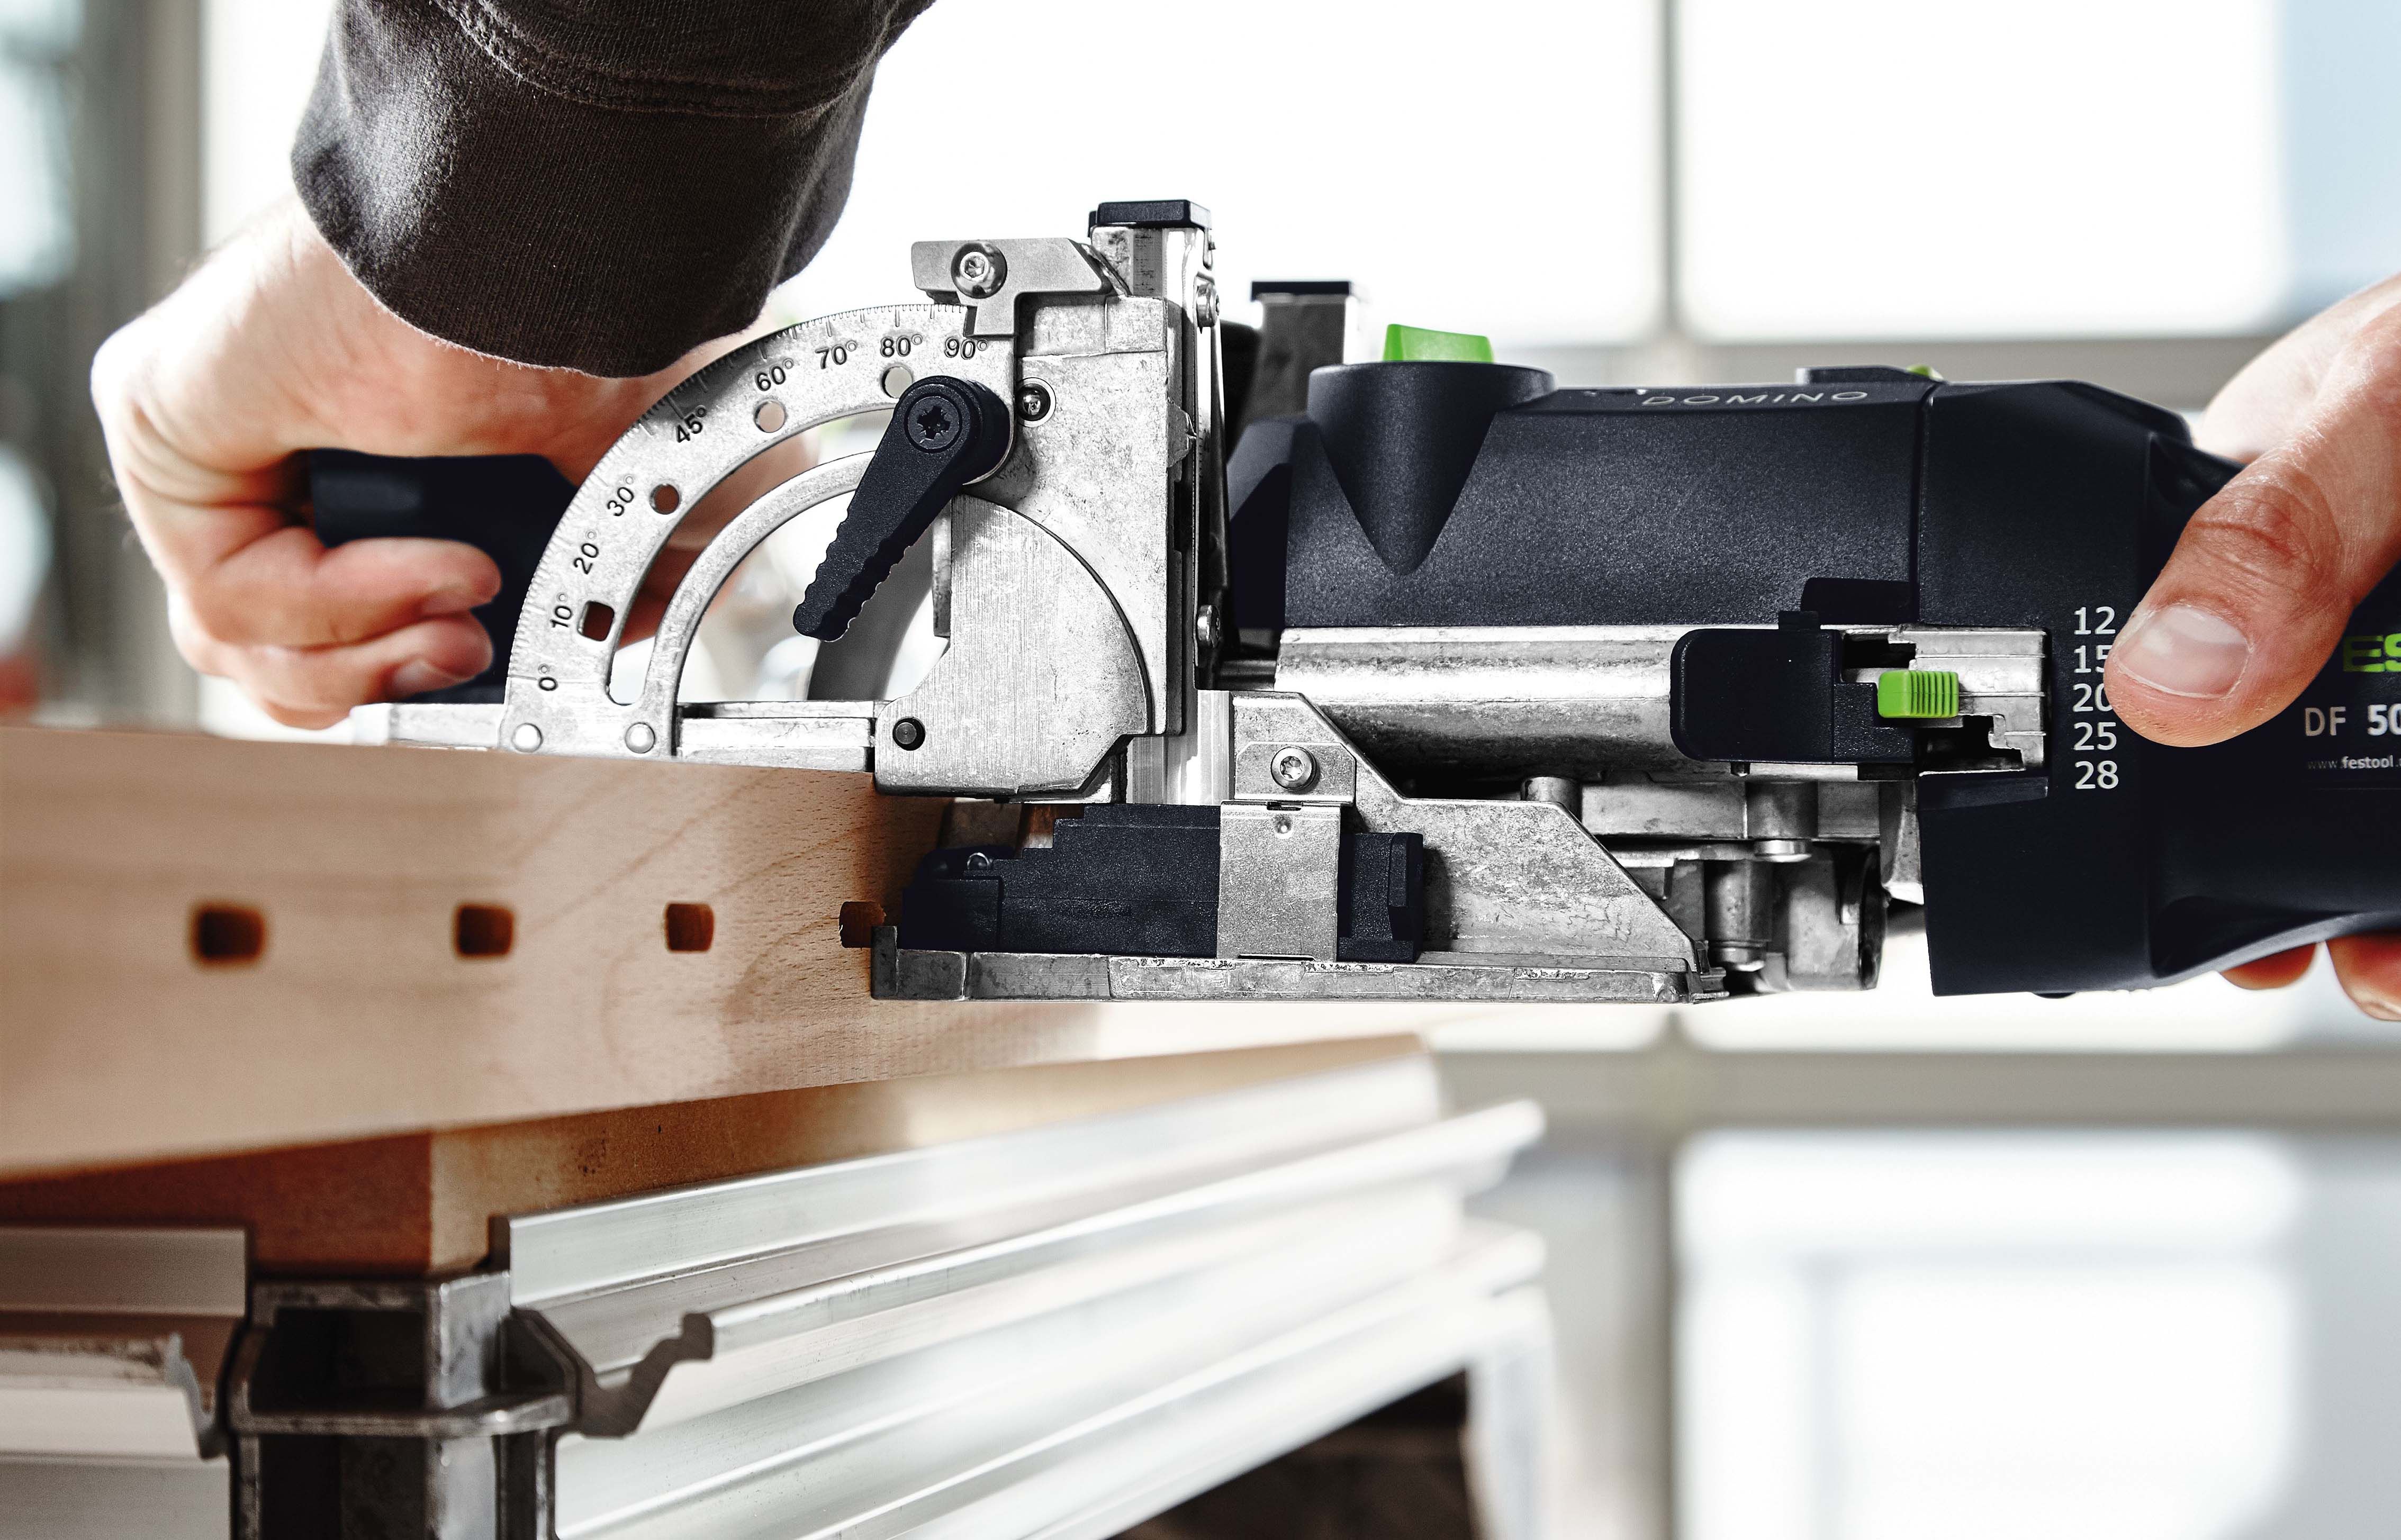 DF 500 DOMINO Joining Machine in Systainer 576416 by Festool